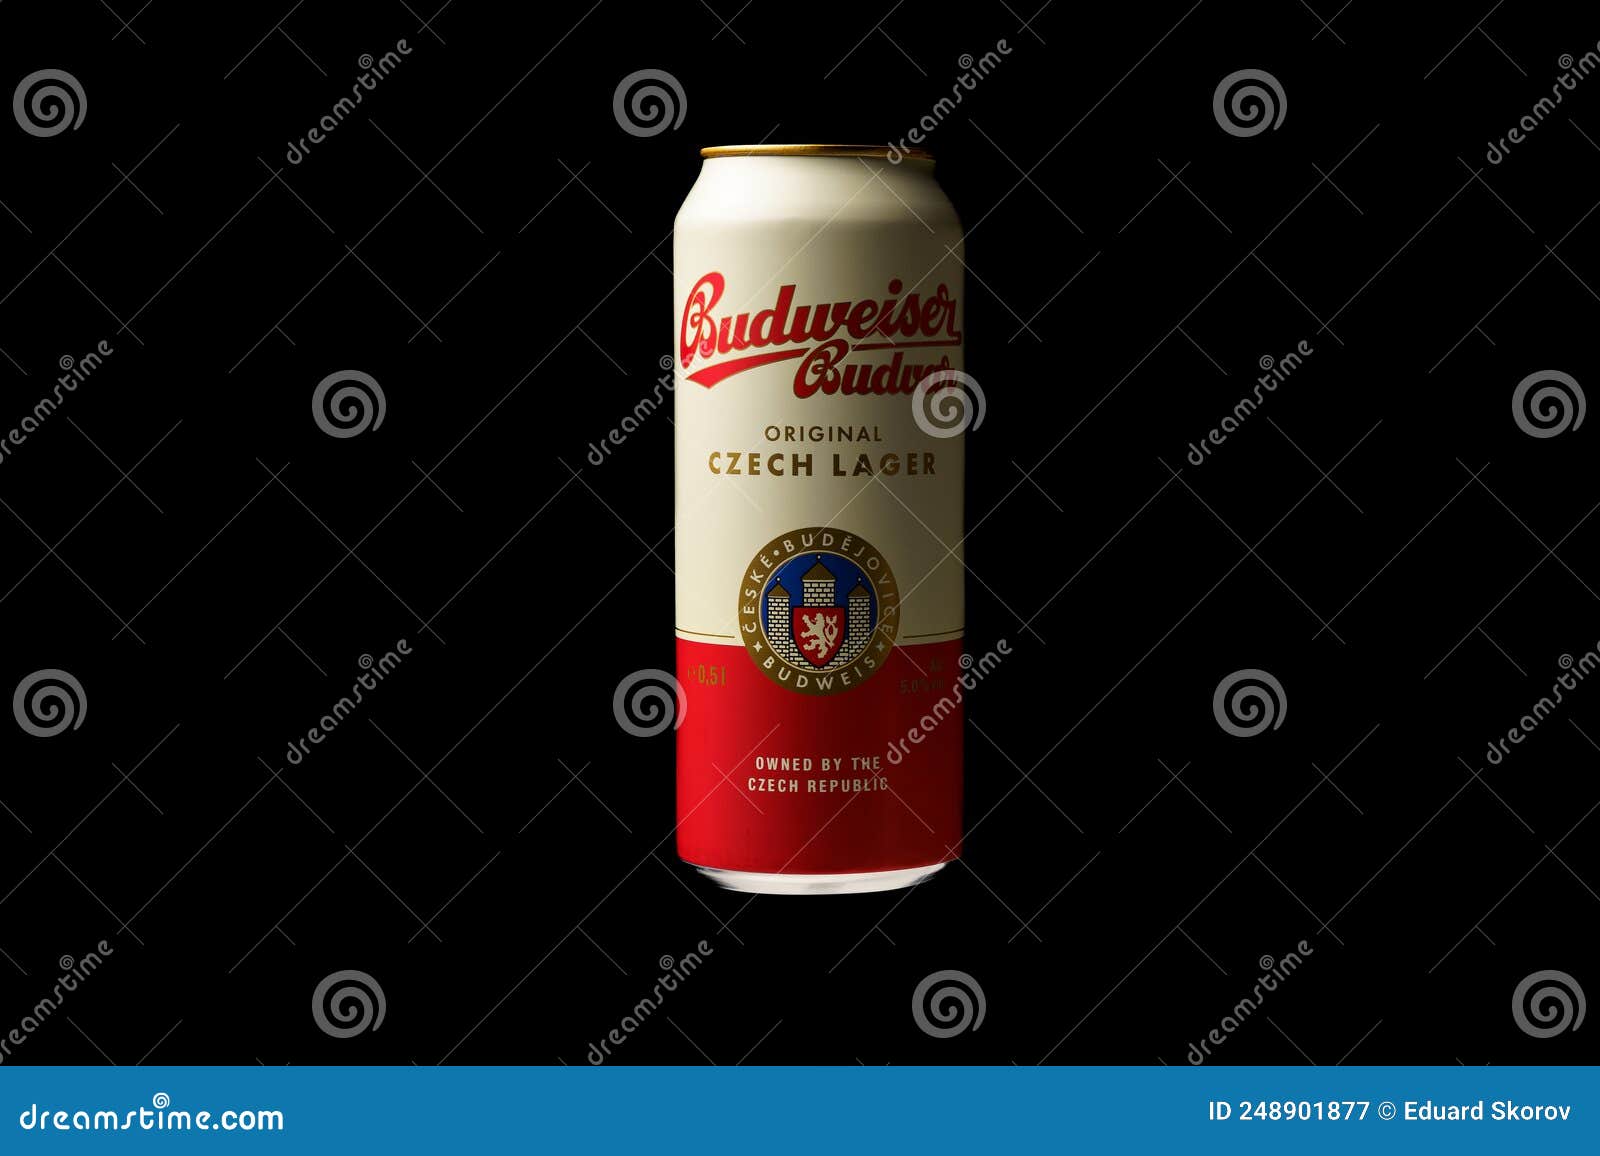 Budweiser on Twitter Audiofrost Its your lucky day David  httpstco9WHQzPVl0n  Twitter